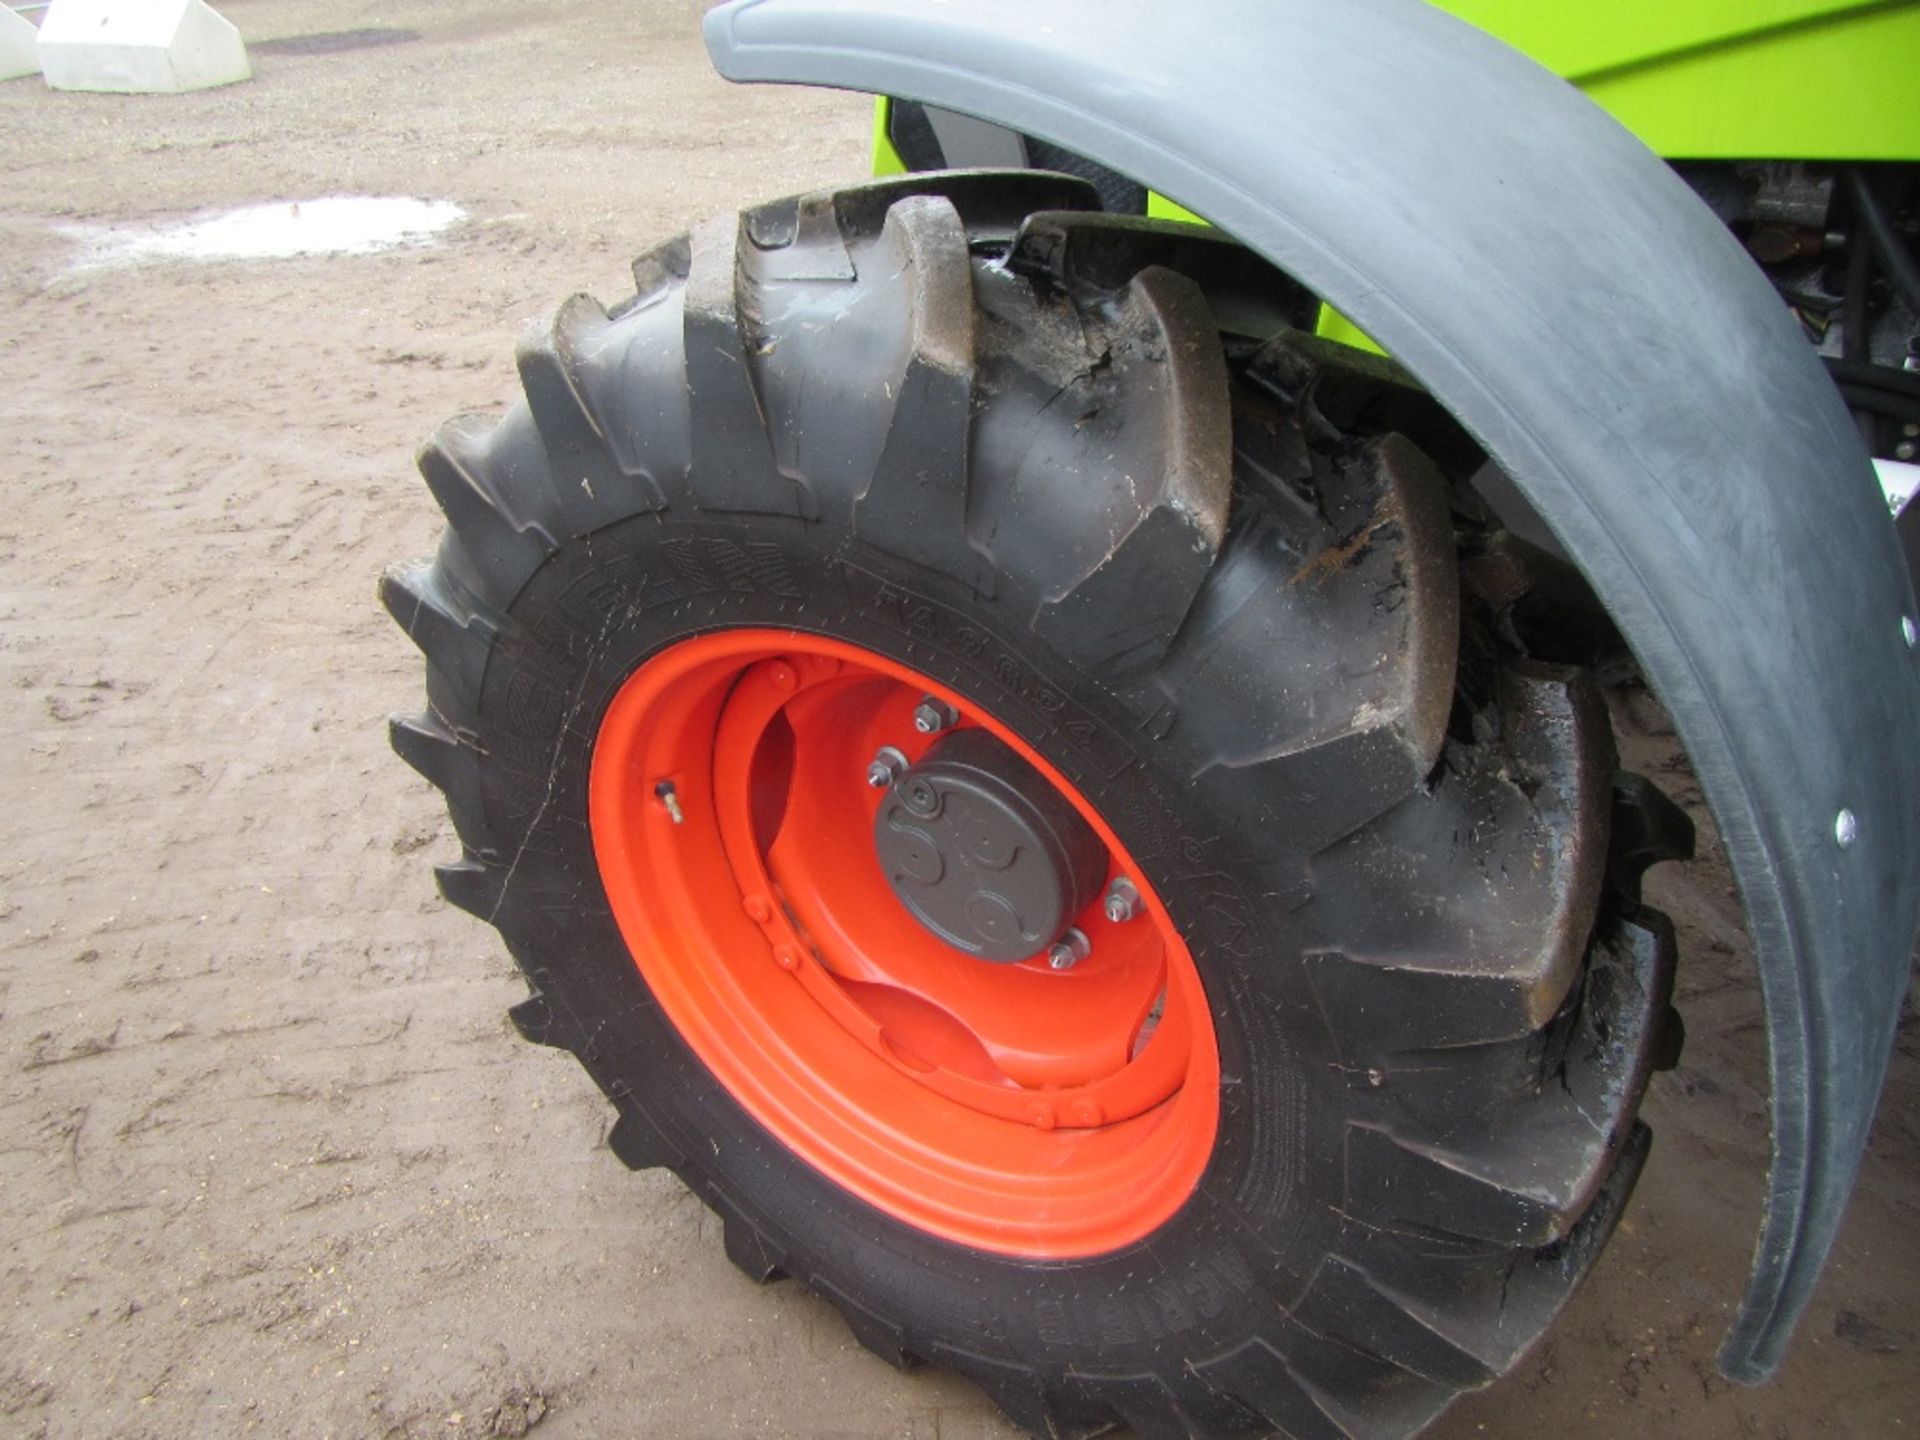 2014 Claas Axos 340C Tractor c/w Loader 500 Hrs Reg No GN64 CZF Ser No 2220597 - Image 11 of 17